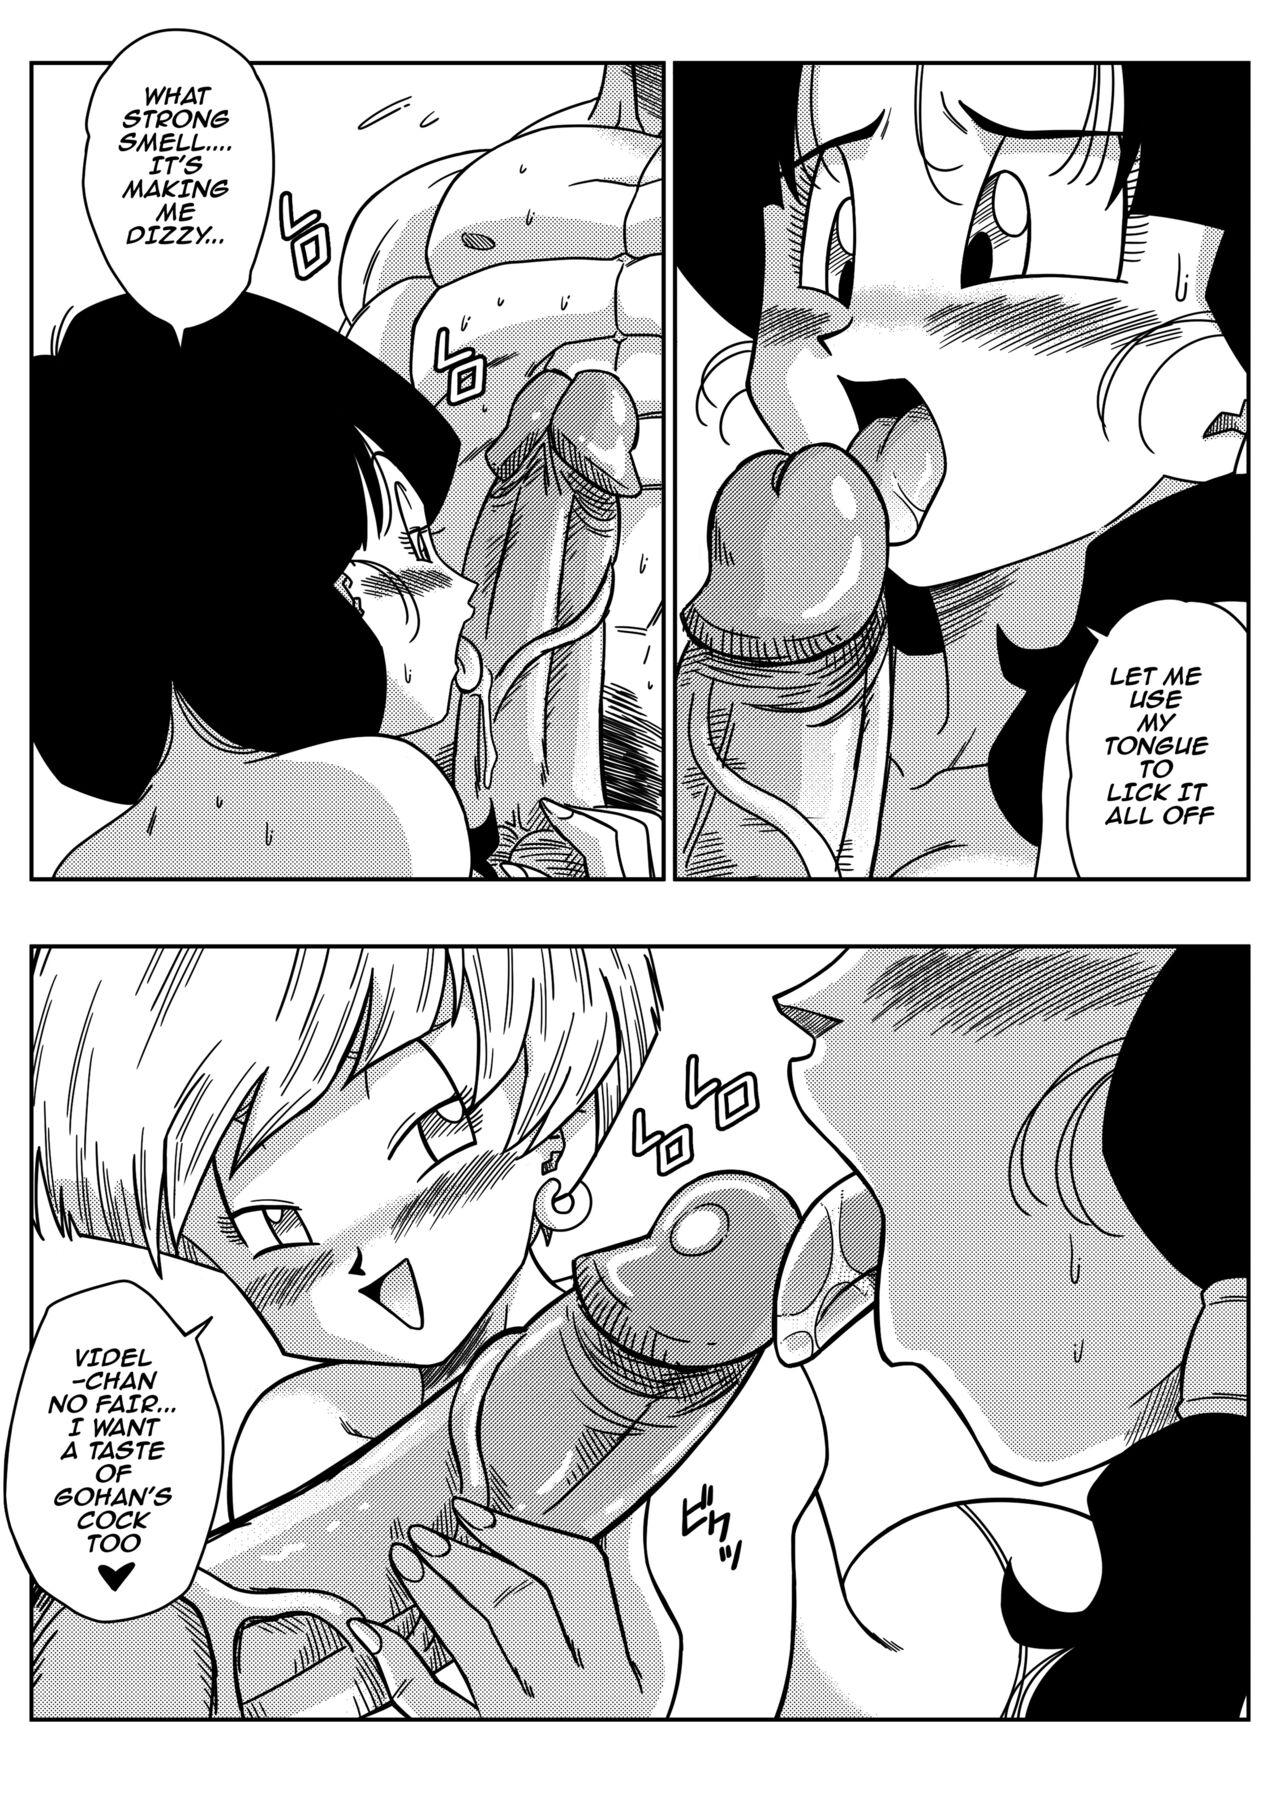 Peruana LOVE TRIANGLE Z - Part 2 Blondes - Page 8